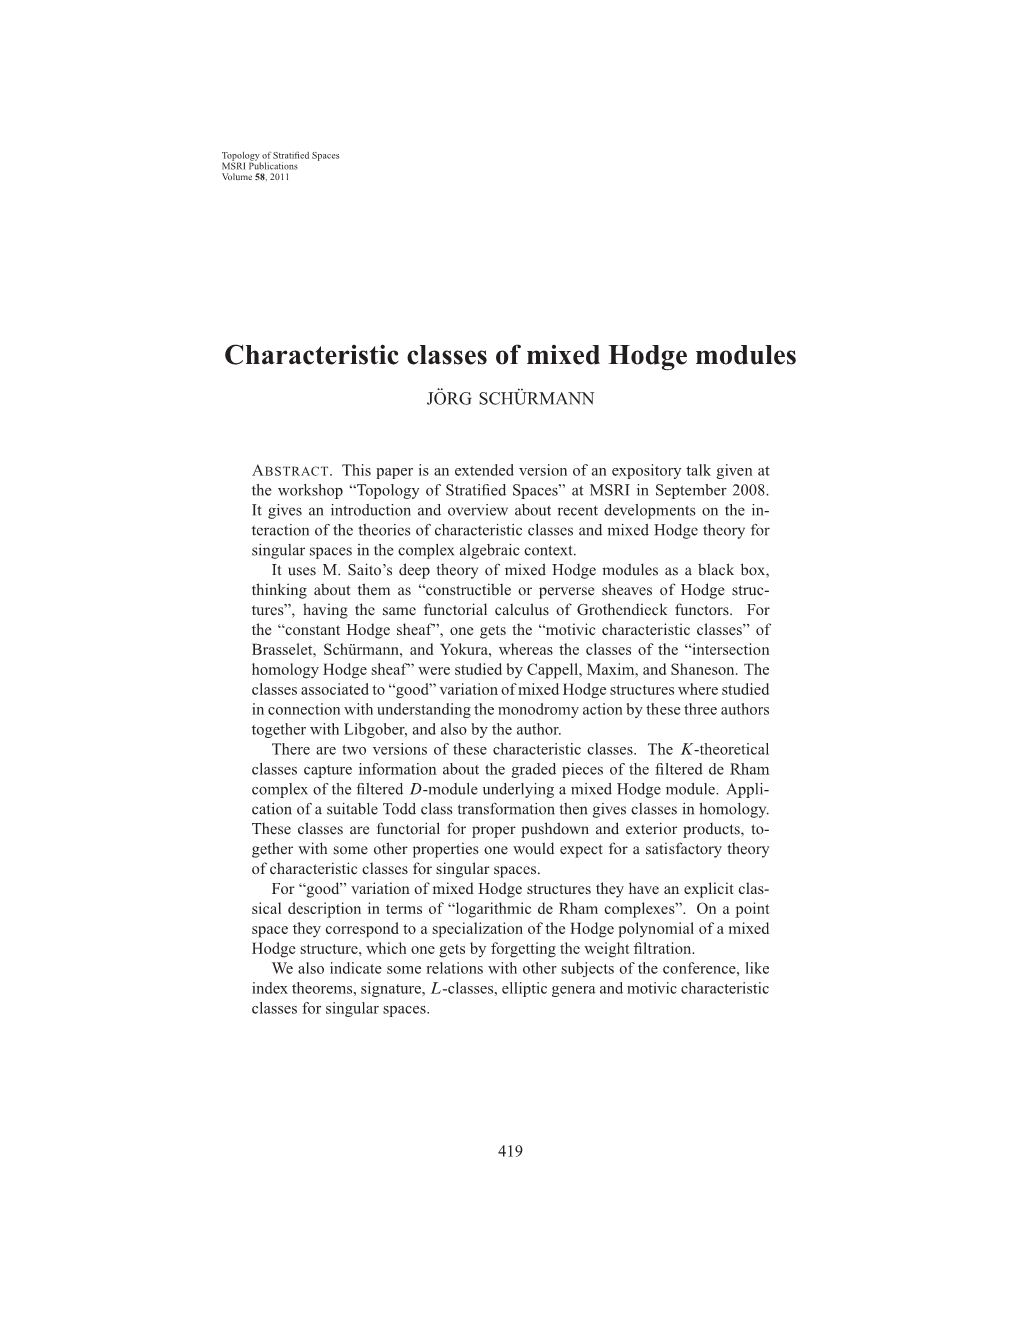 Characteristic Classes of Mixed Hodge Modules